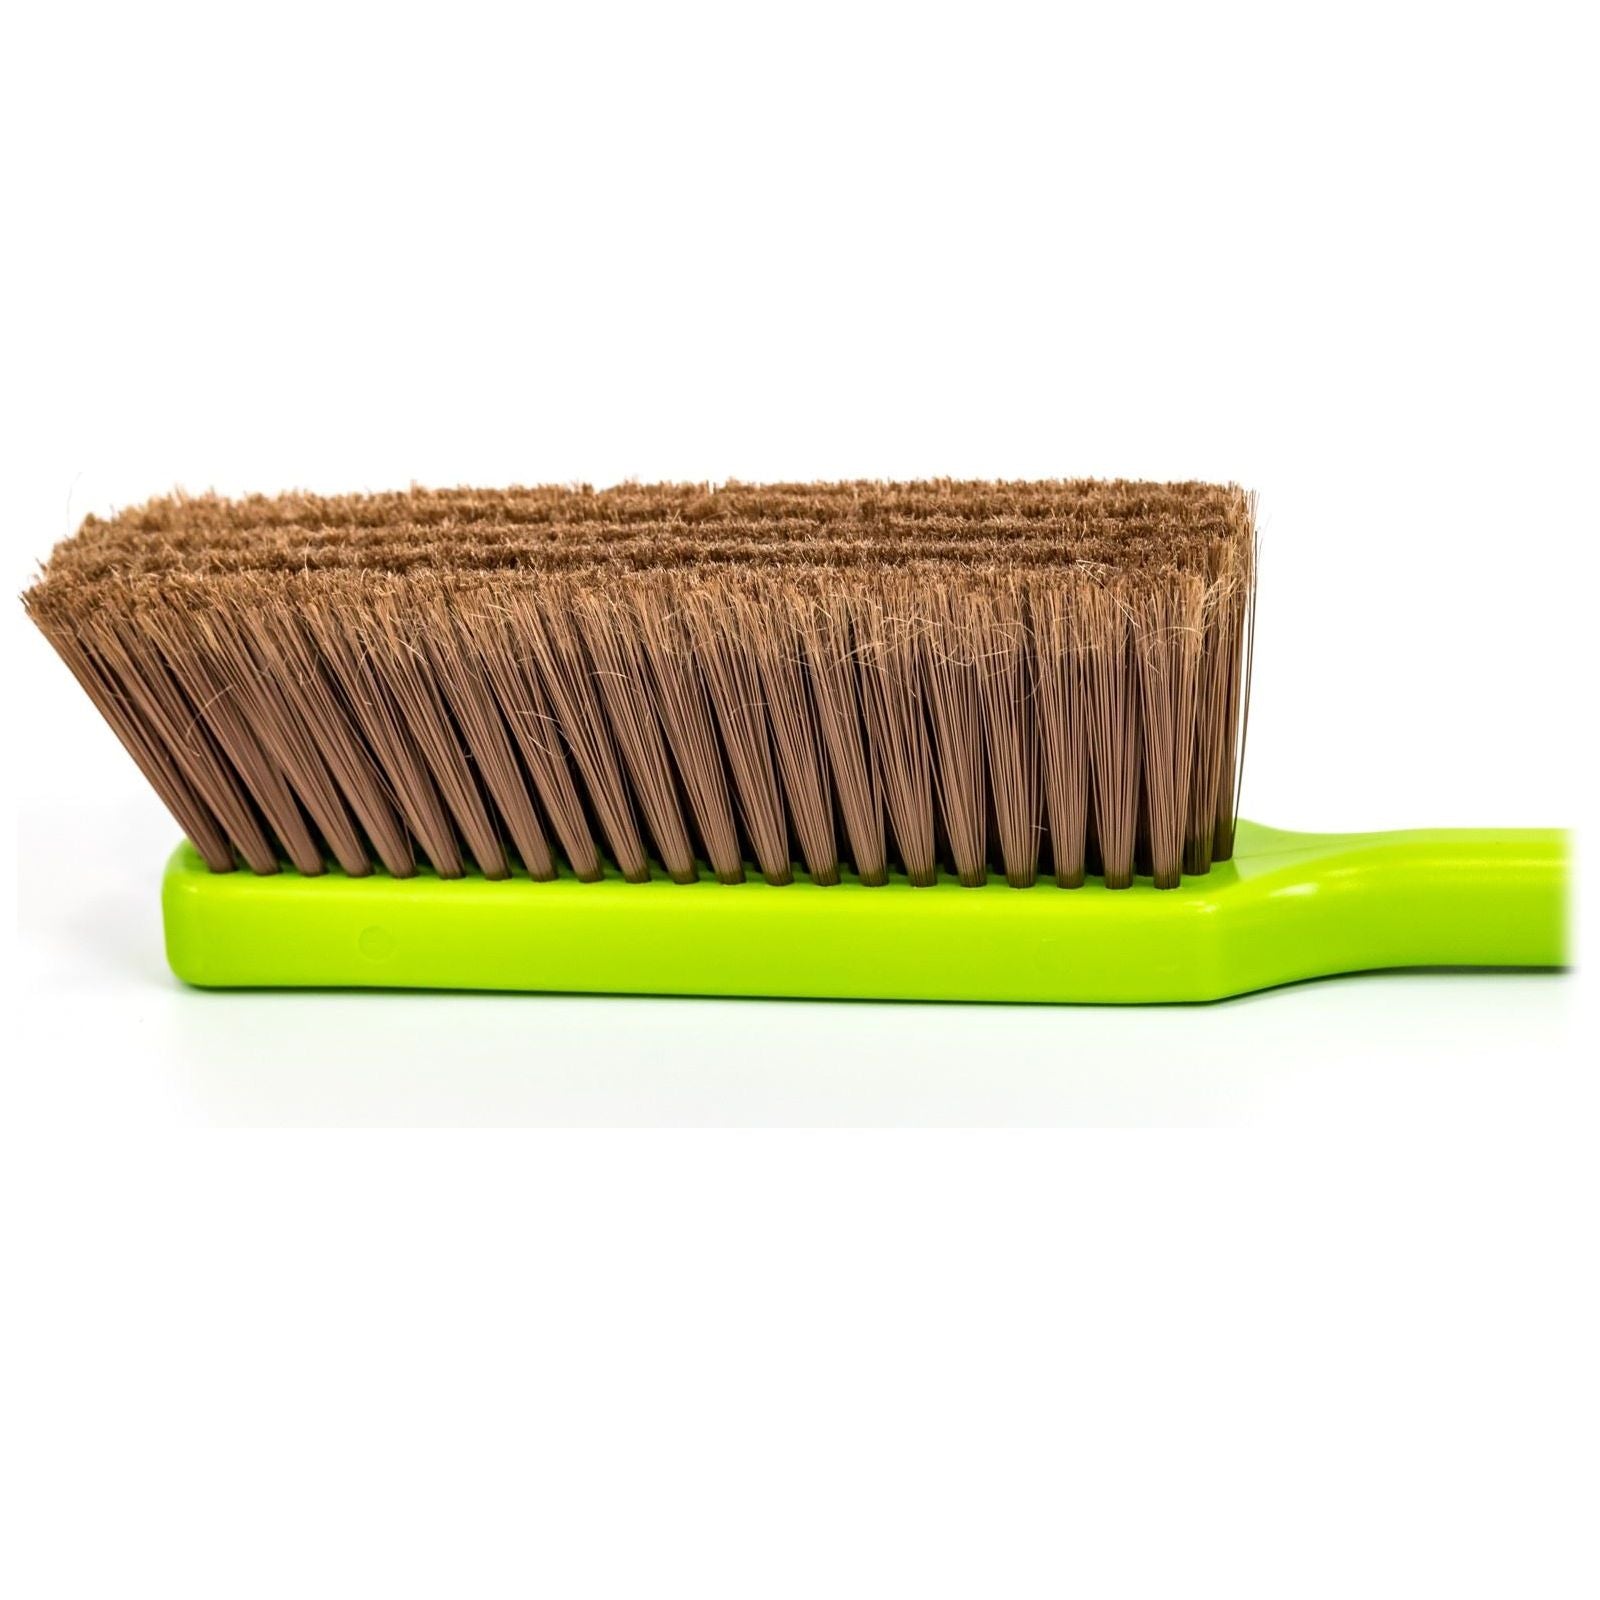 Replacement Large Hand Brush for Garden Dustpan